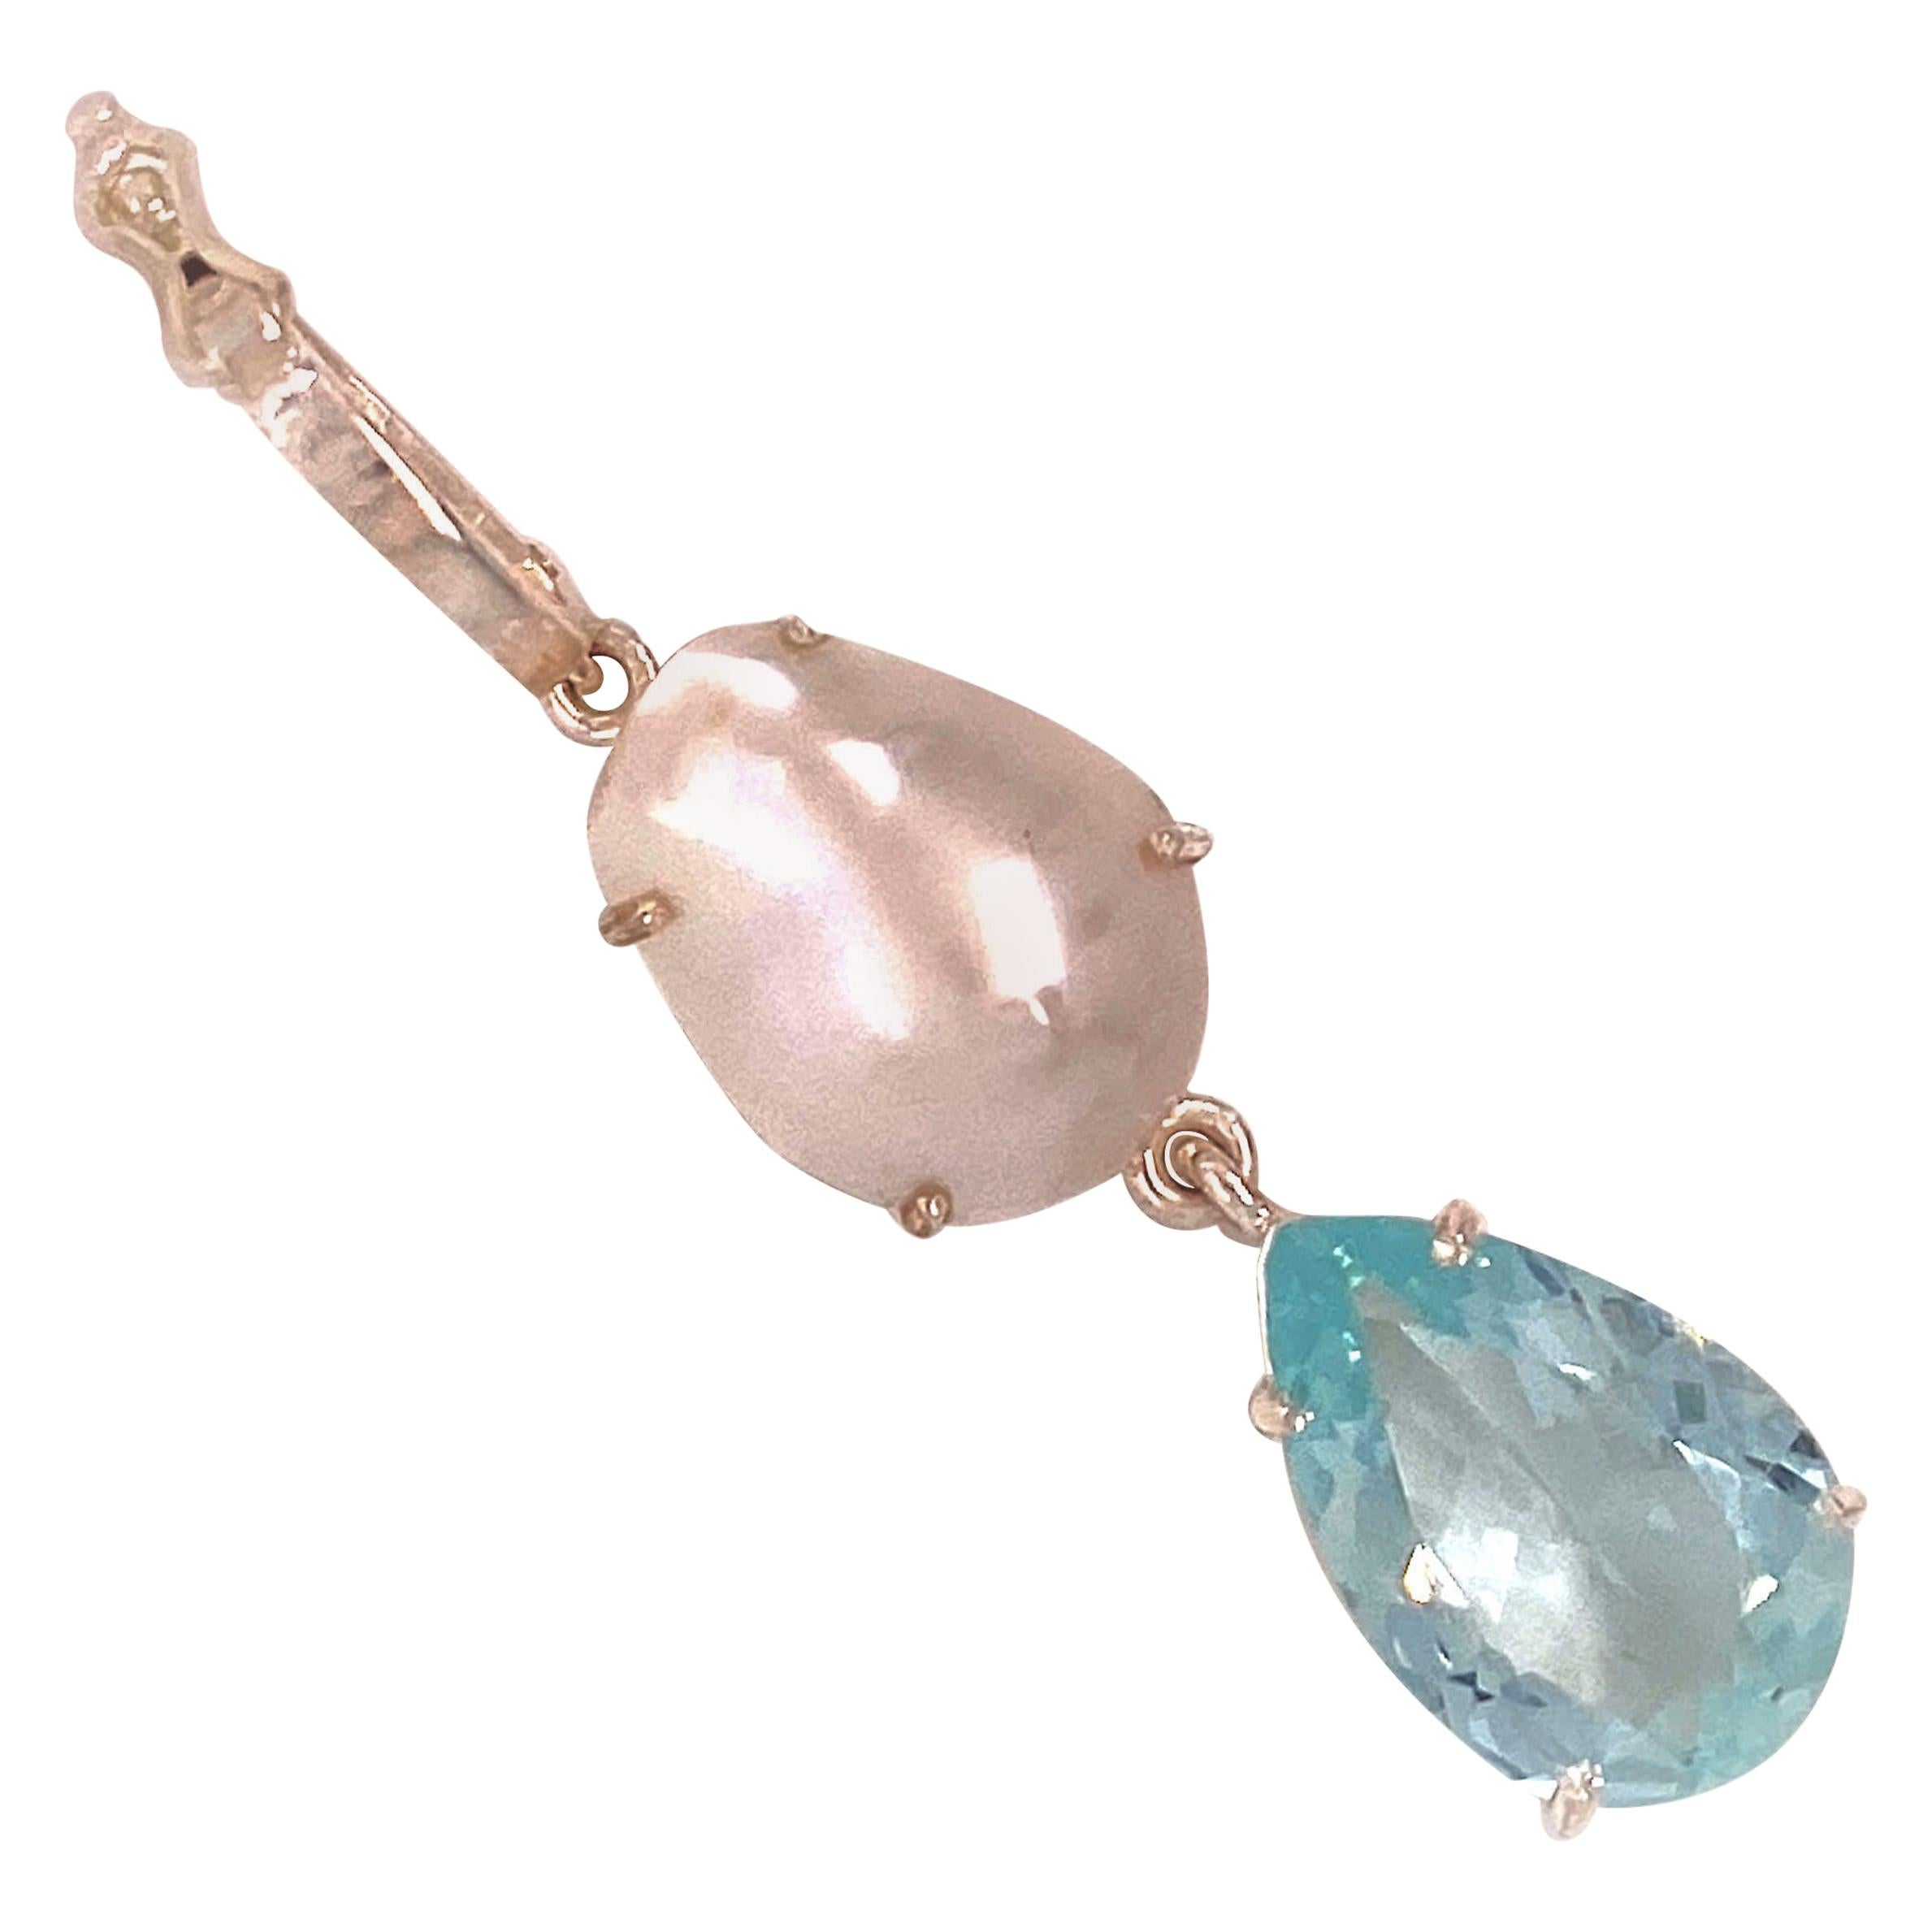 AJD Springtime Gift of Aquamarine and Pearl Pendant June Birthstone  Great Gift!